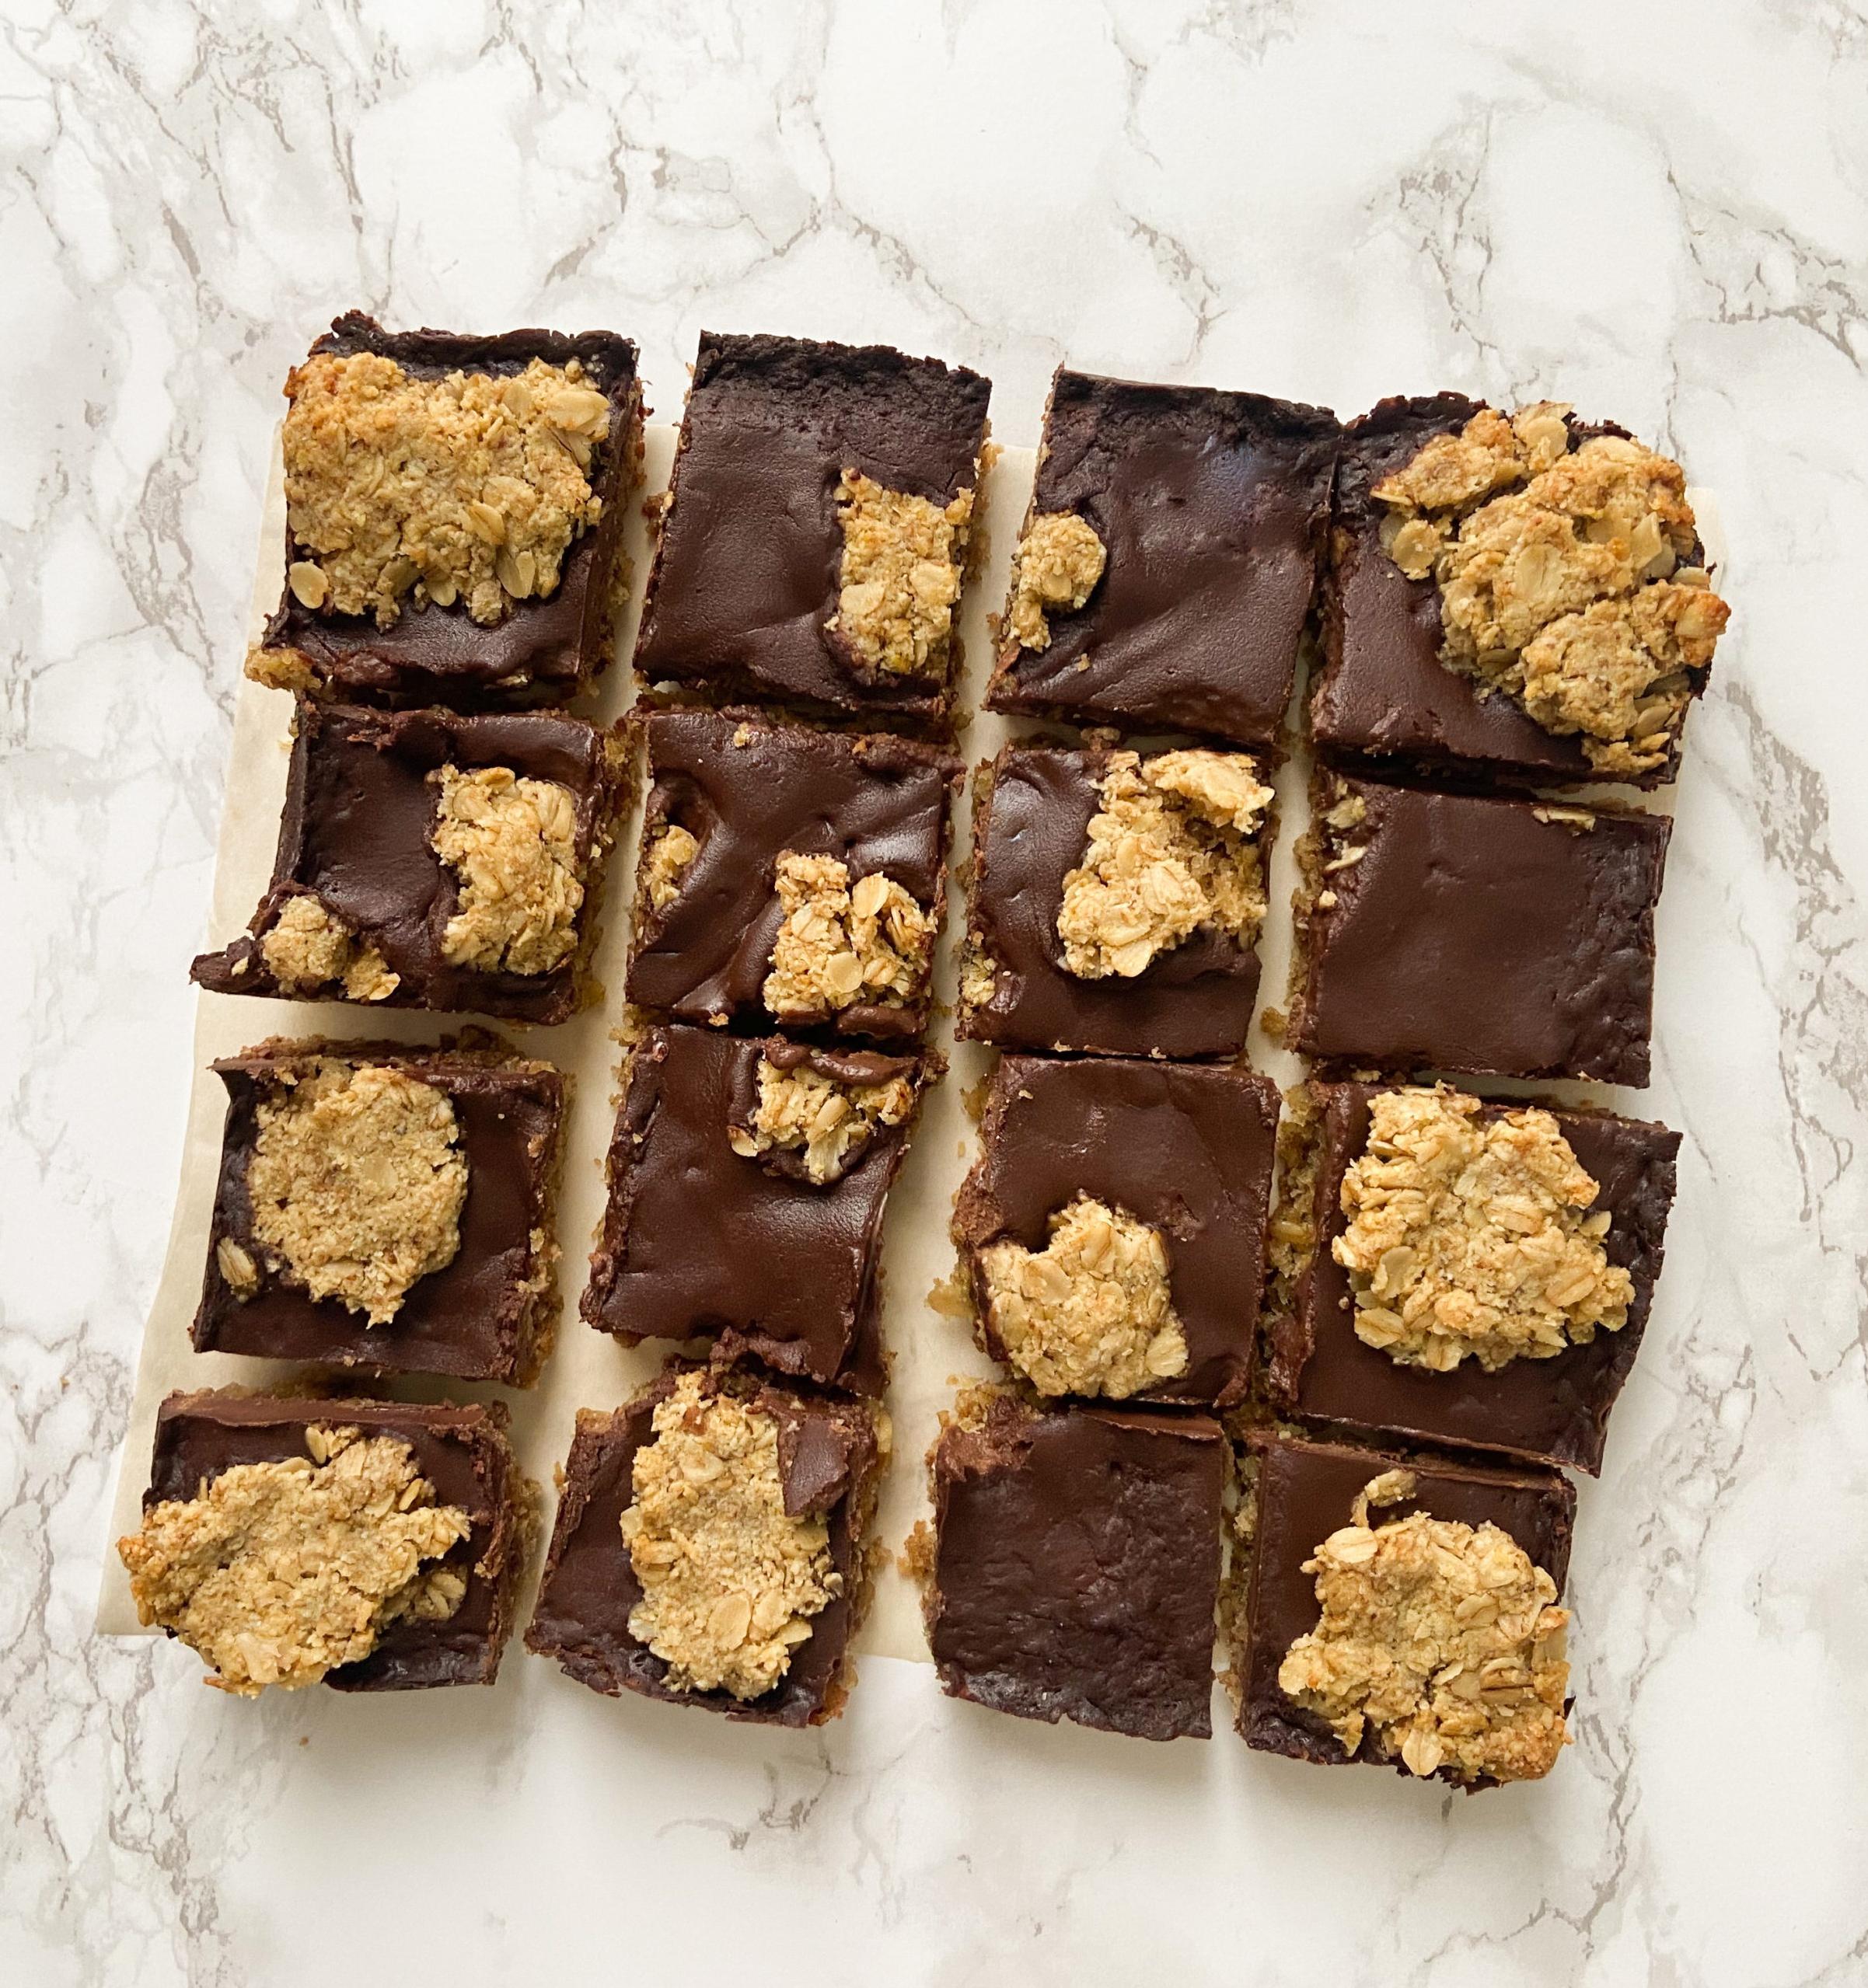  These bars will have you in oat fudge heaven with just one bite.